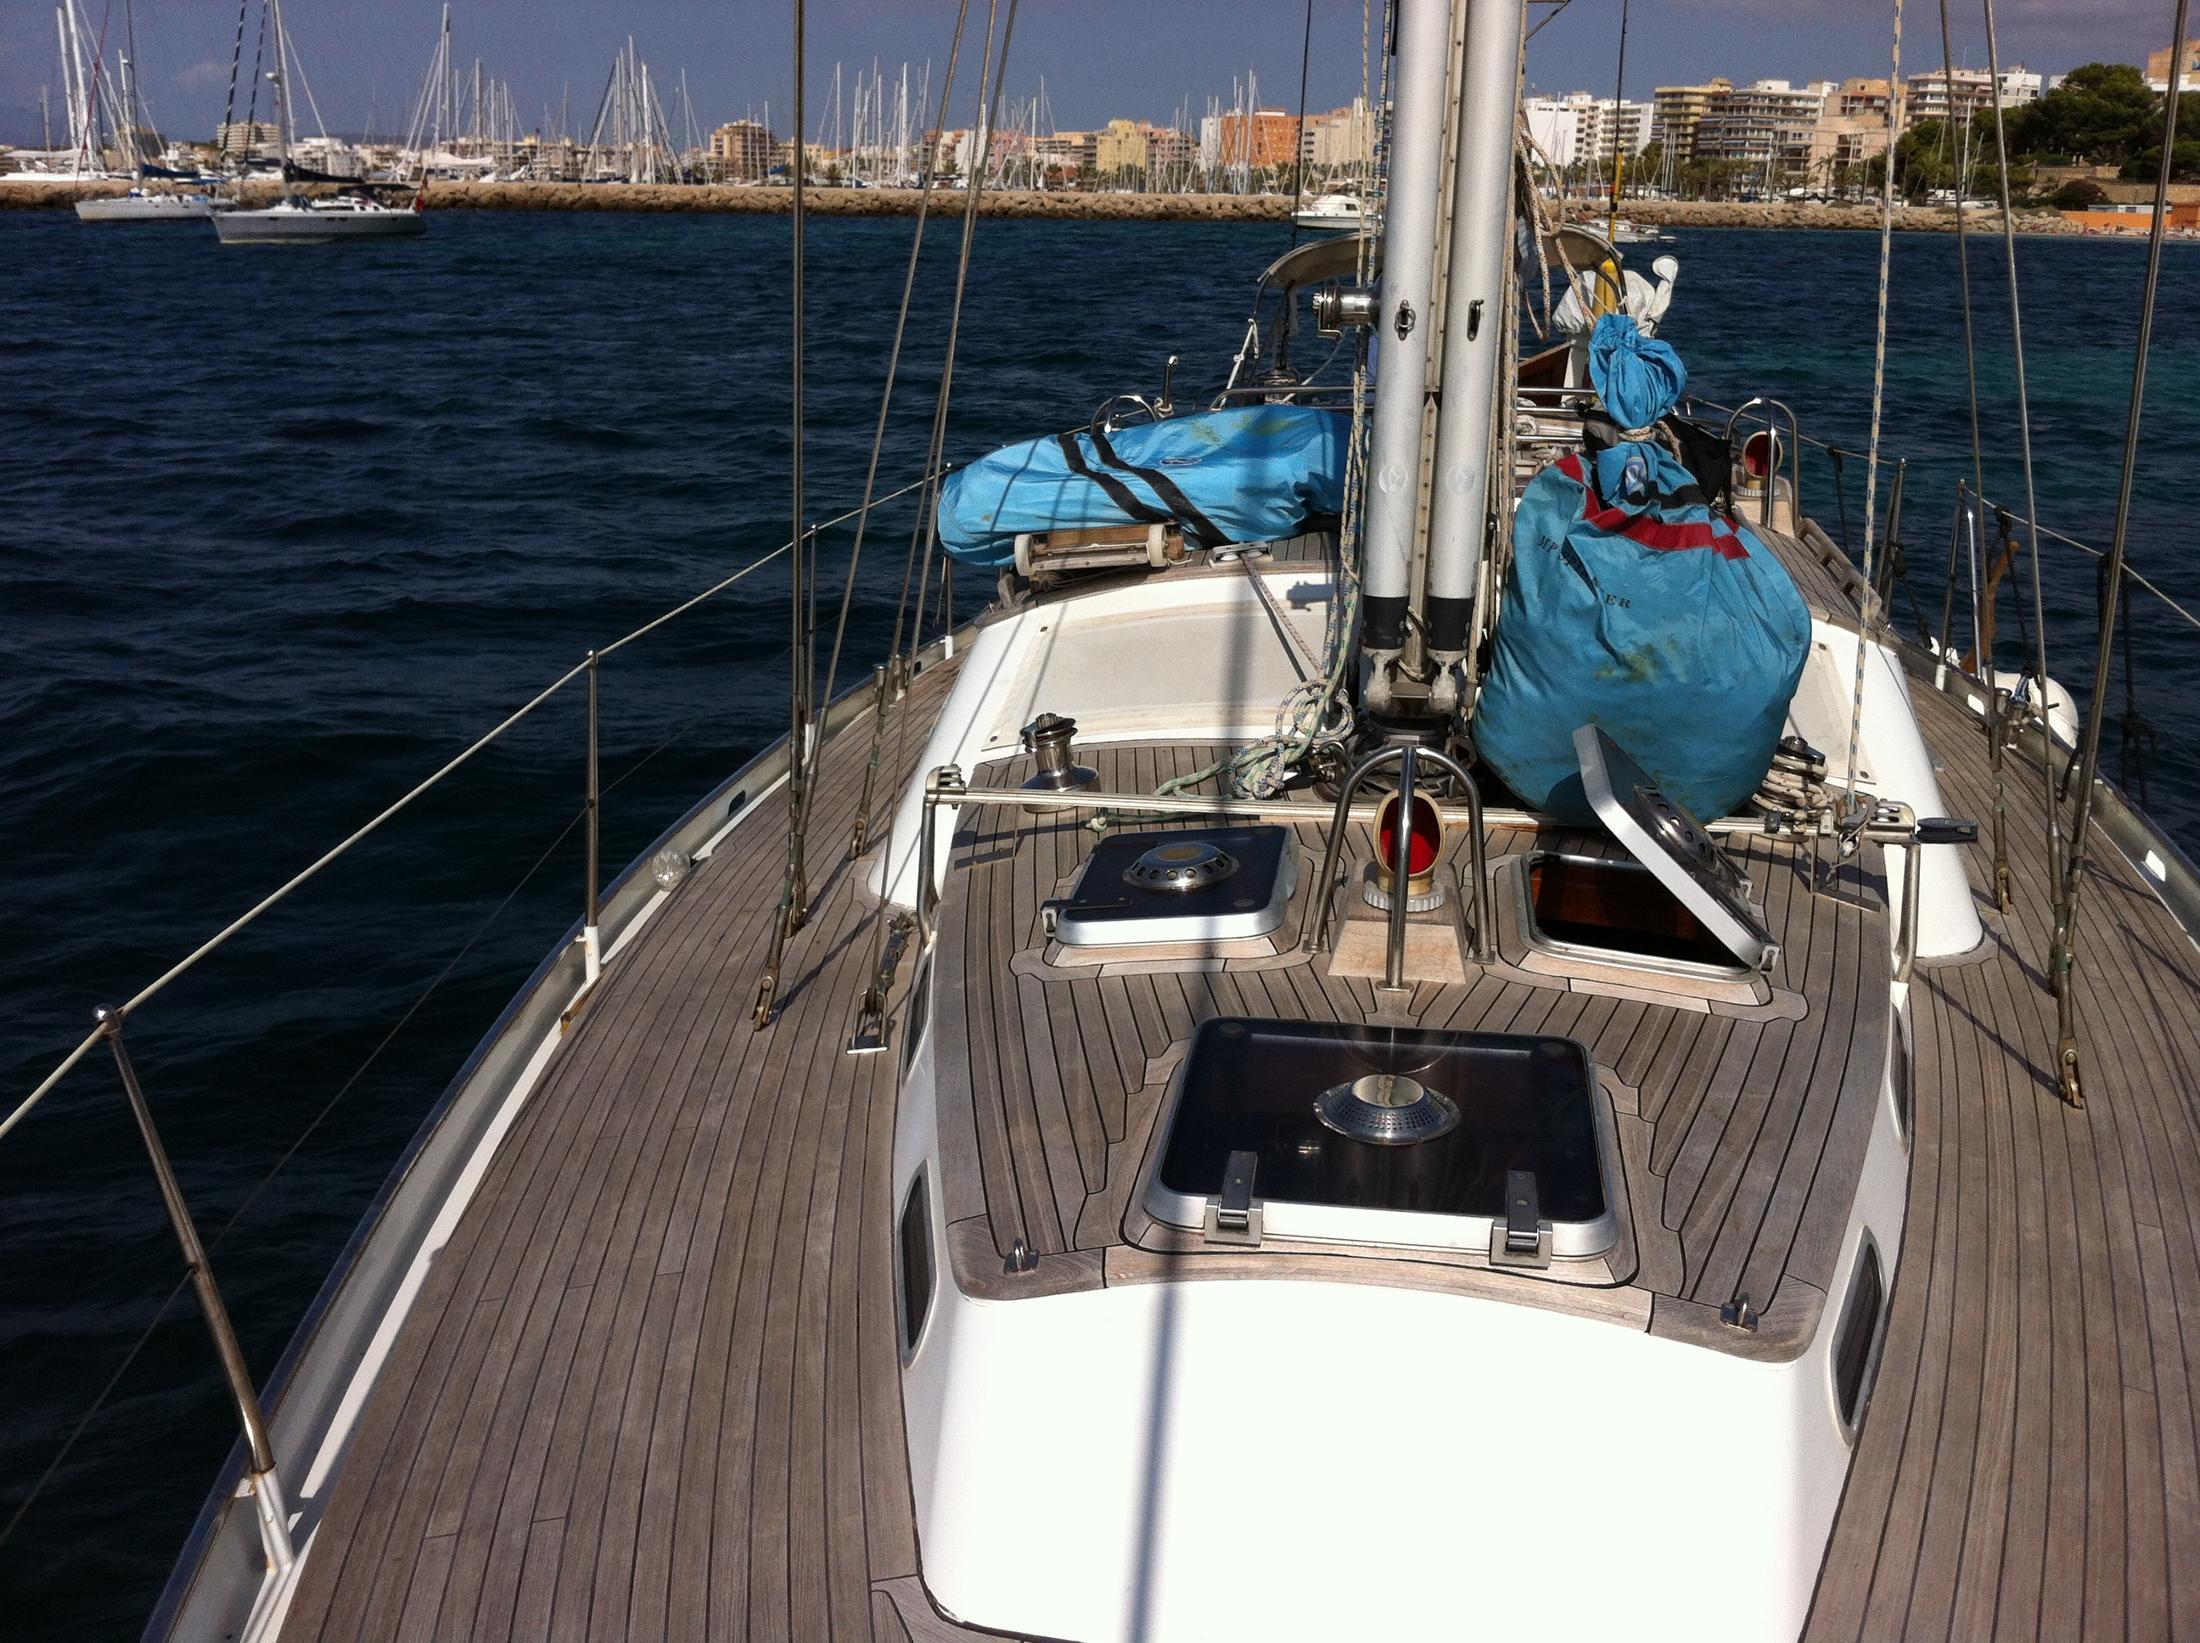 Glacer 43 Lifting Keel